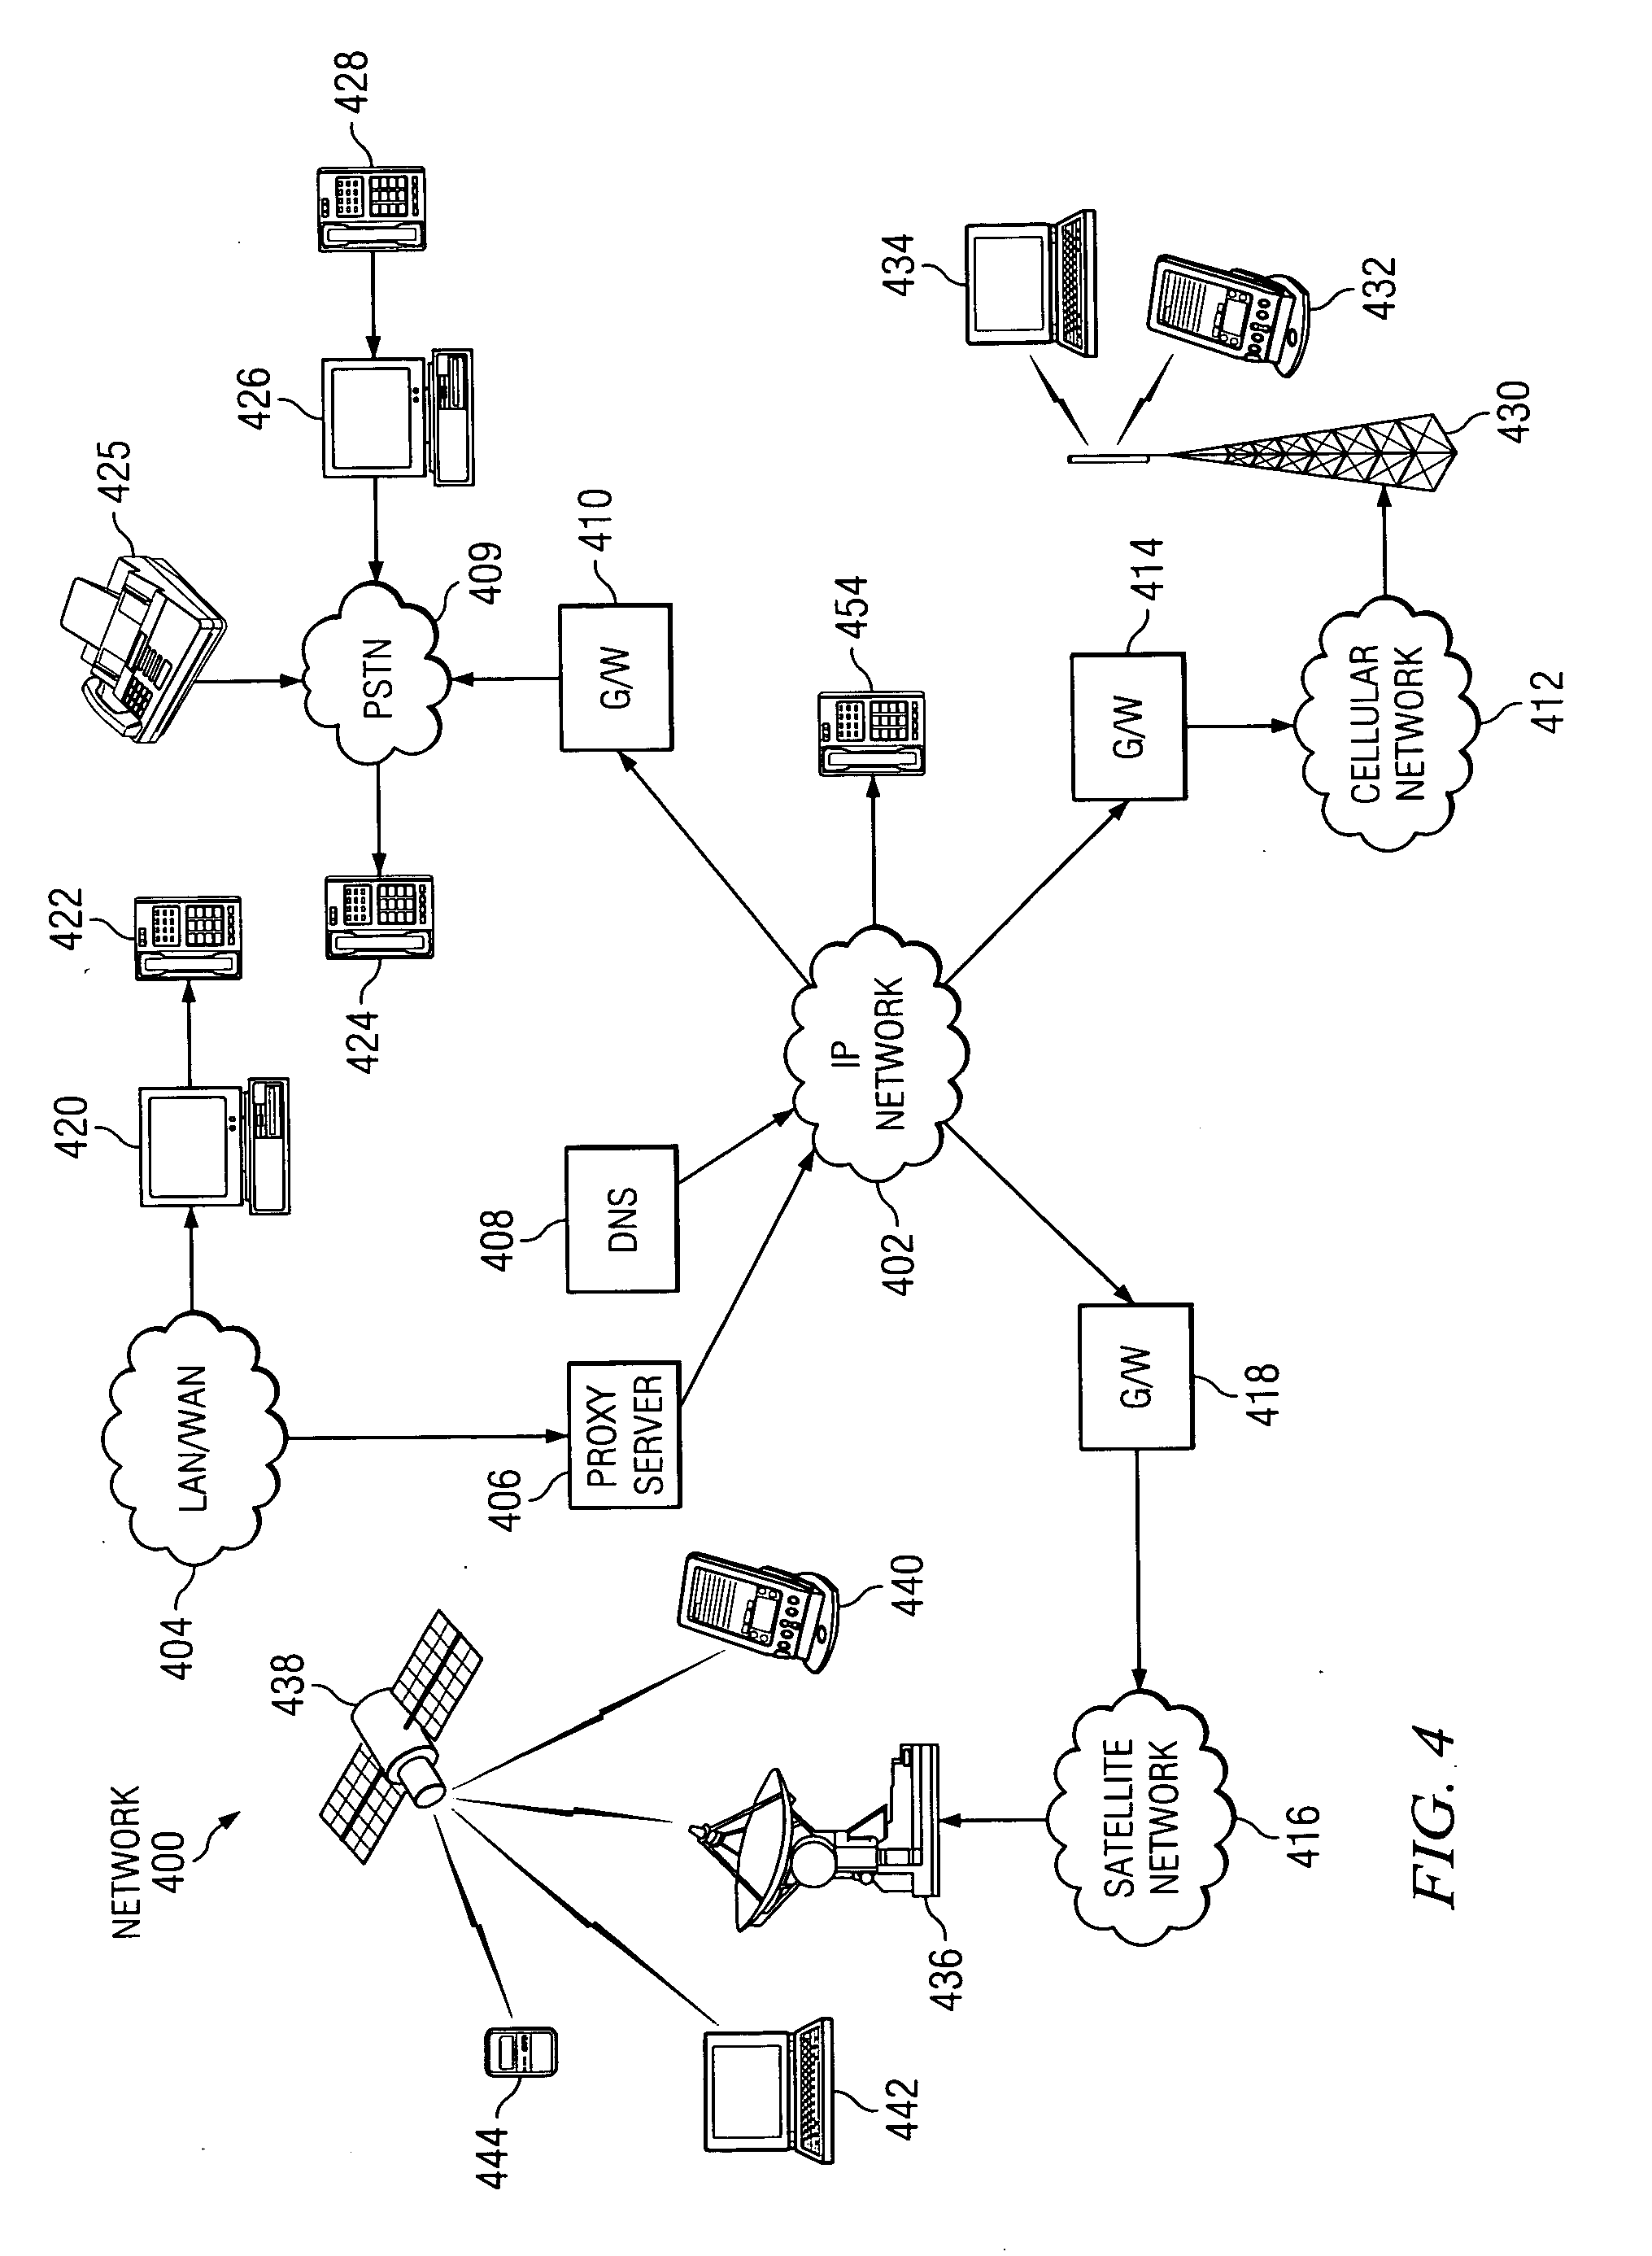 N-ways conference system using only participants' telephony devices without external conference server